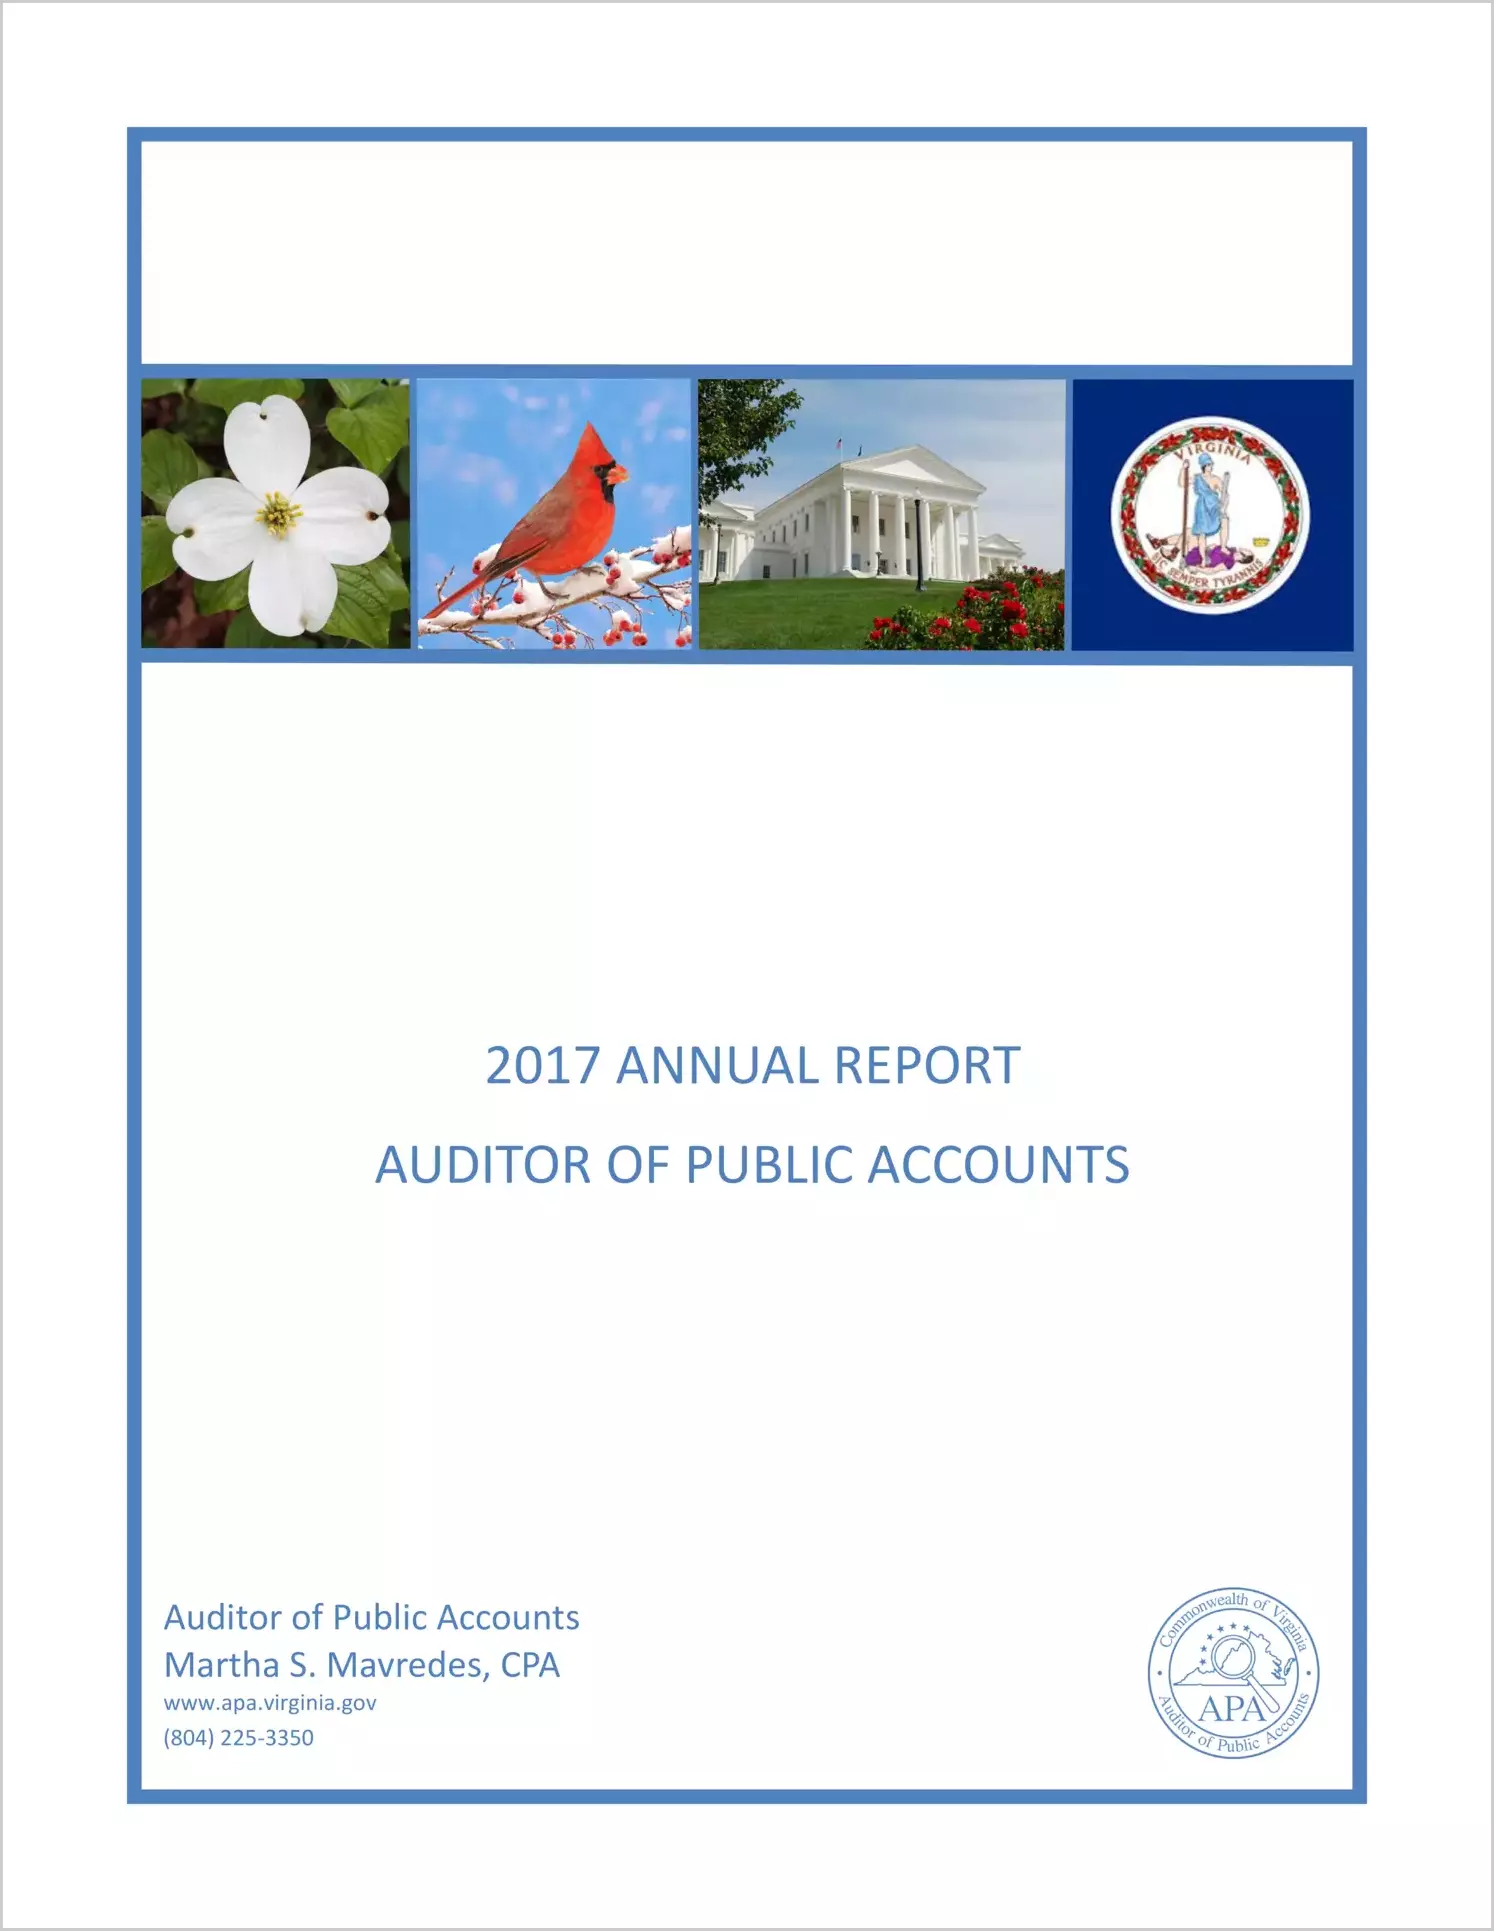 2017 Annual Report Auditor of Public Accounts